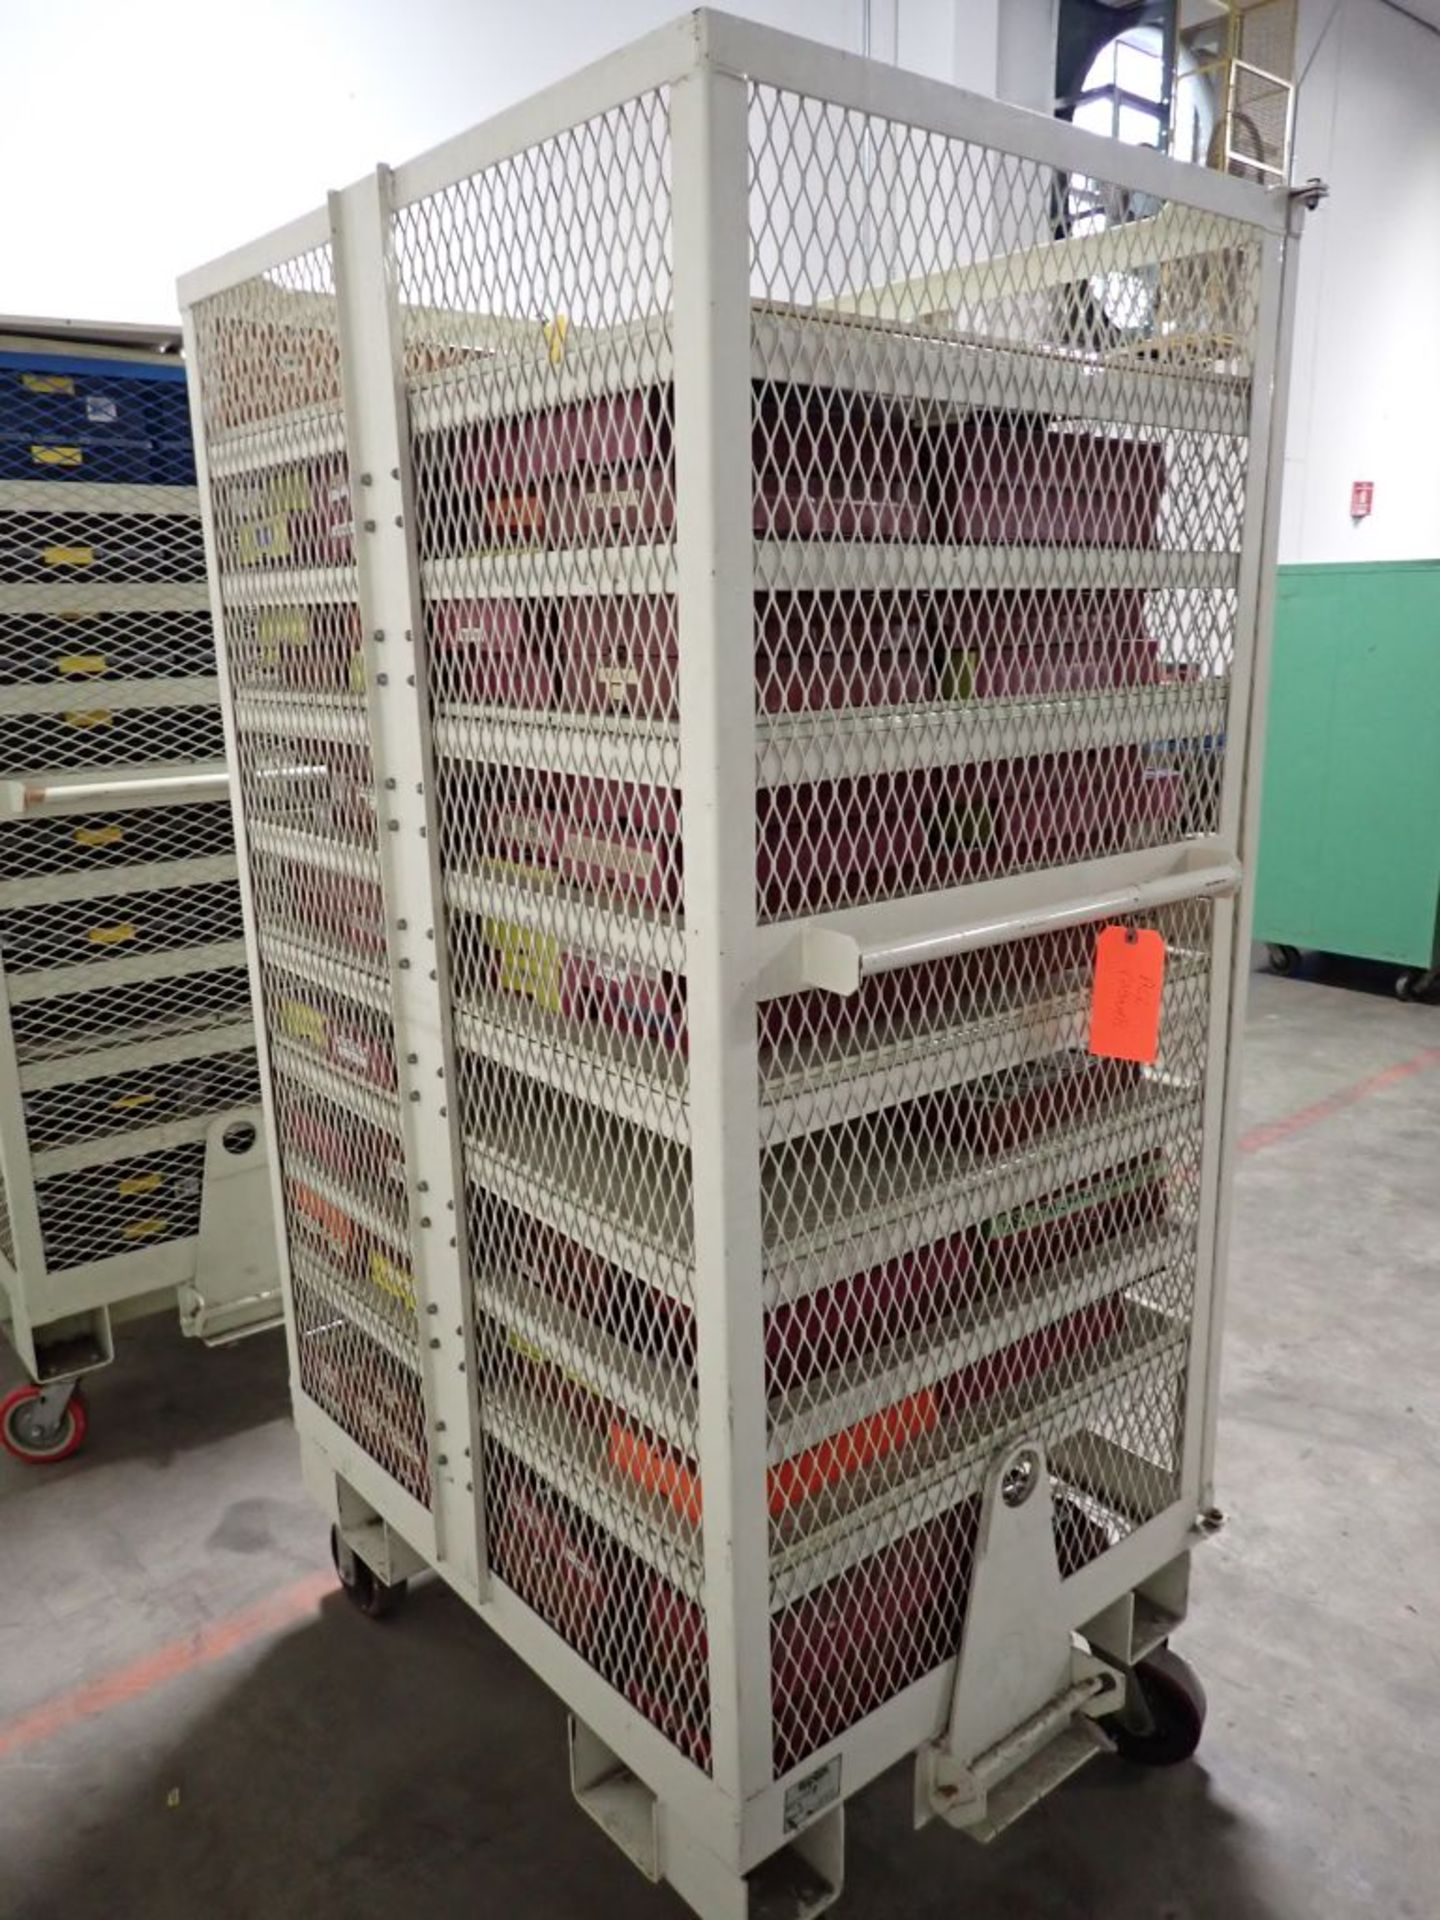 Rolling Locking Cage w/Storage Bins | Tag: 241593 | Limited Forklift Assistance Available - $10.00 - Image 3 of 6